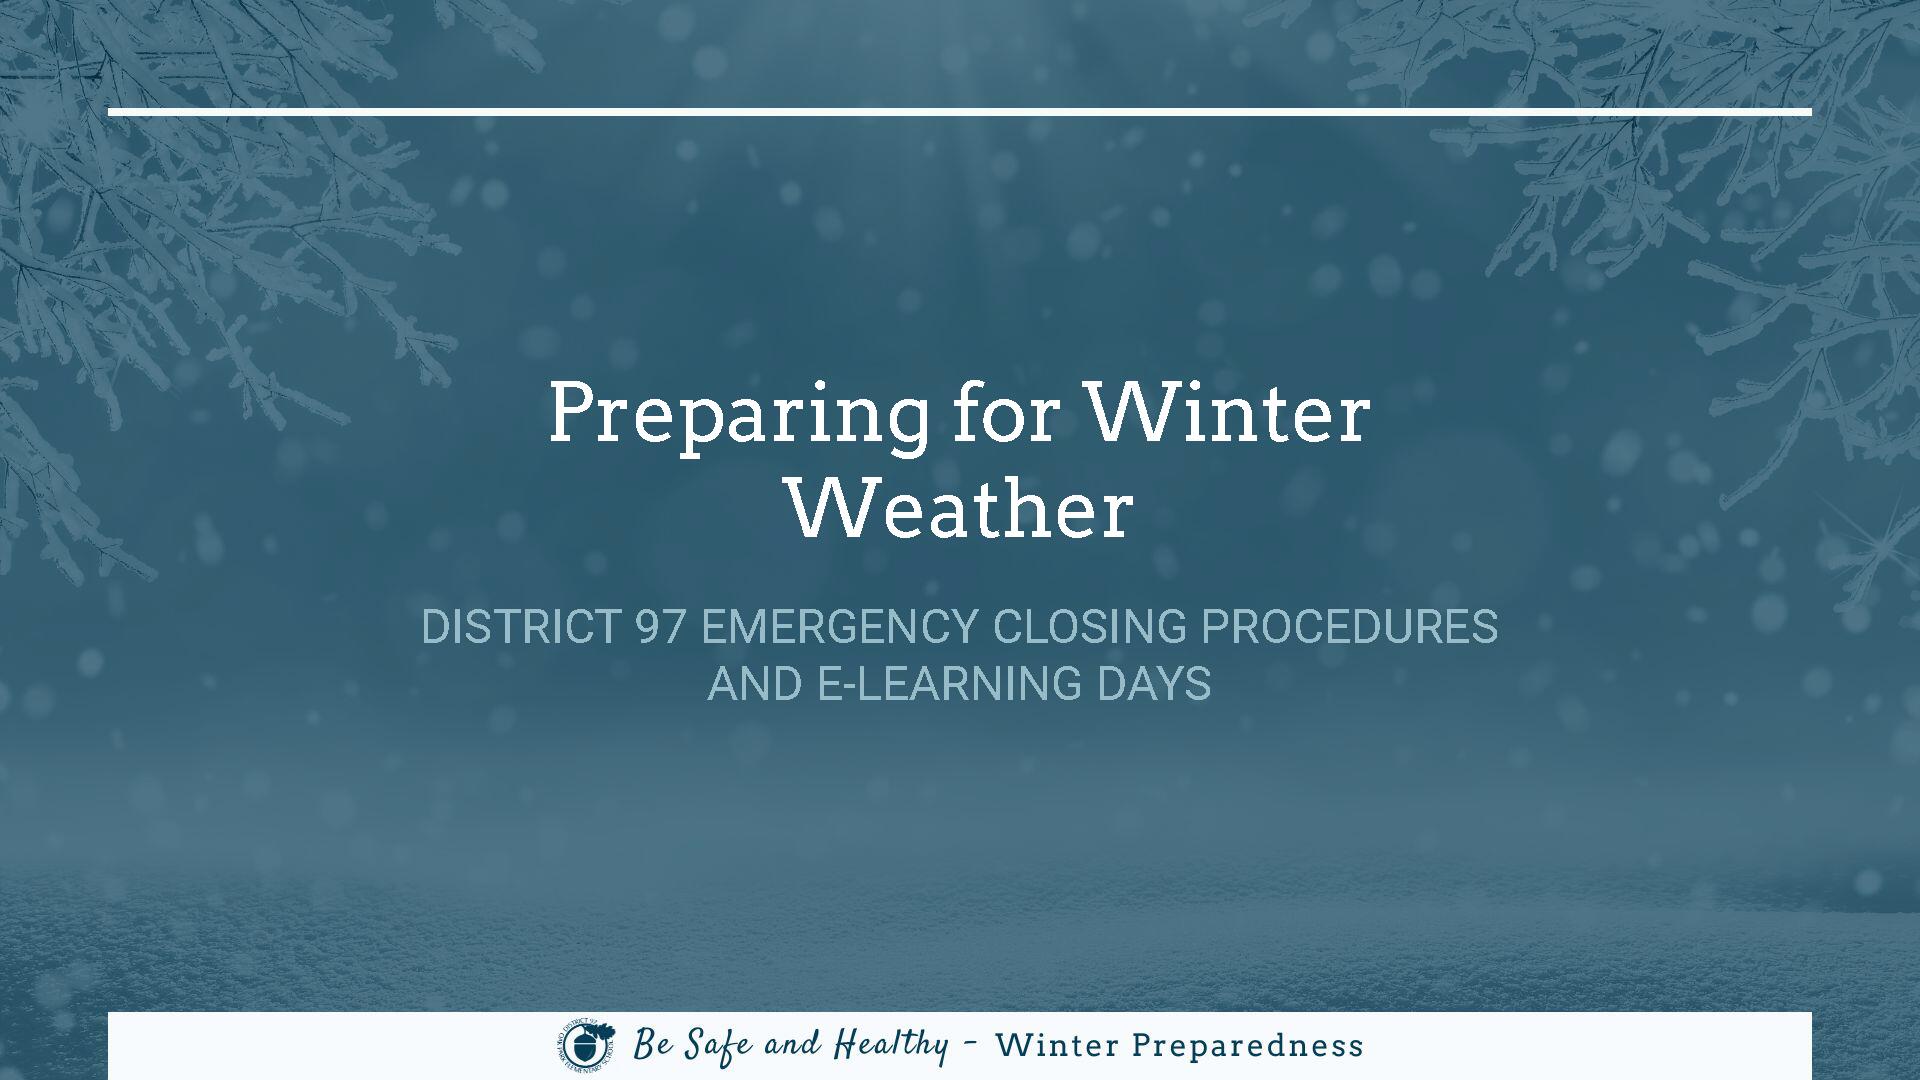 Title page/cover of the "Preparing for Winter Weather" presentation